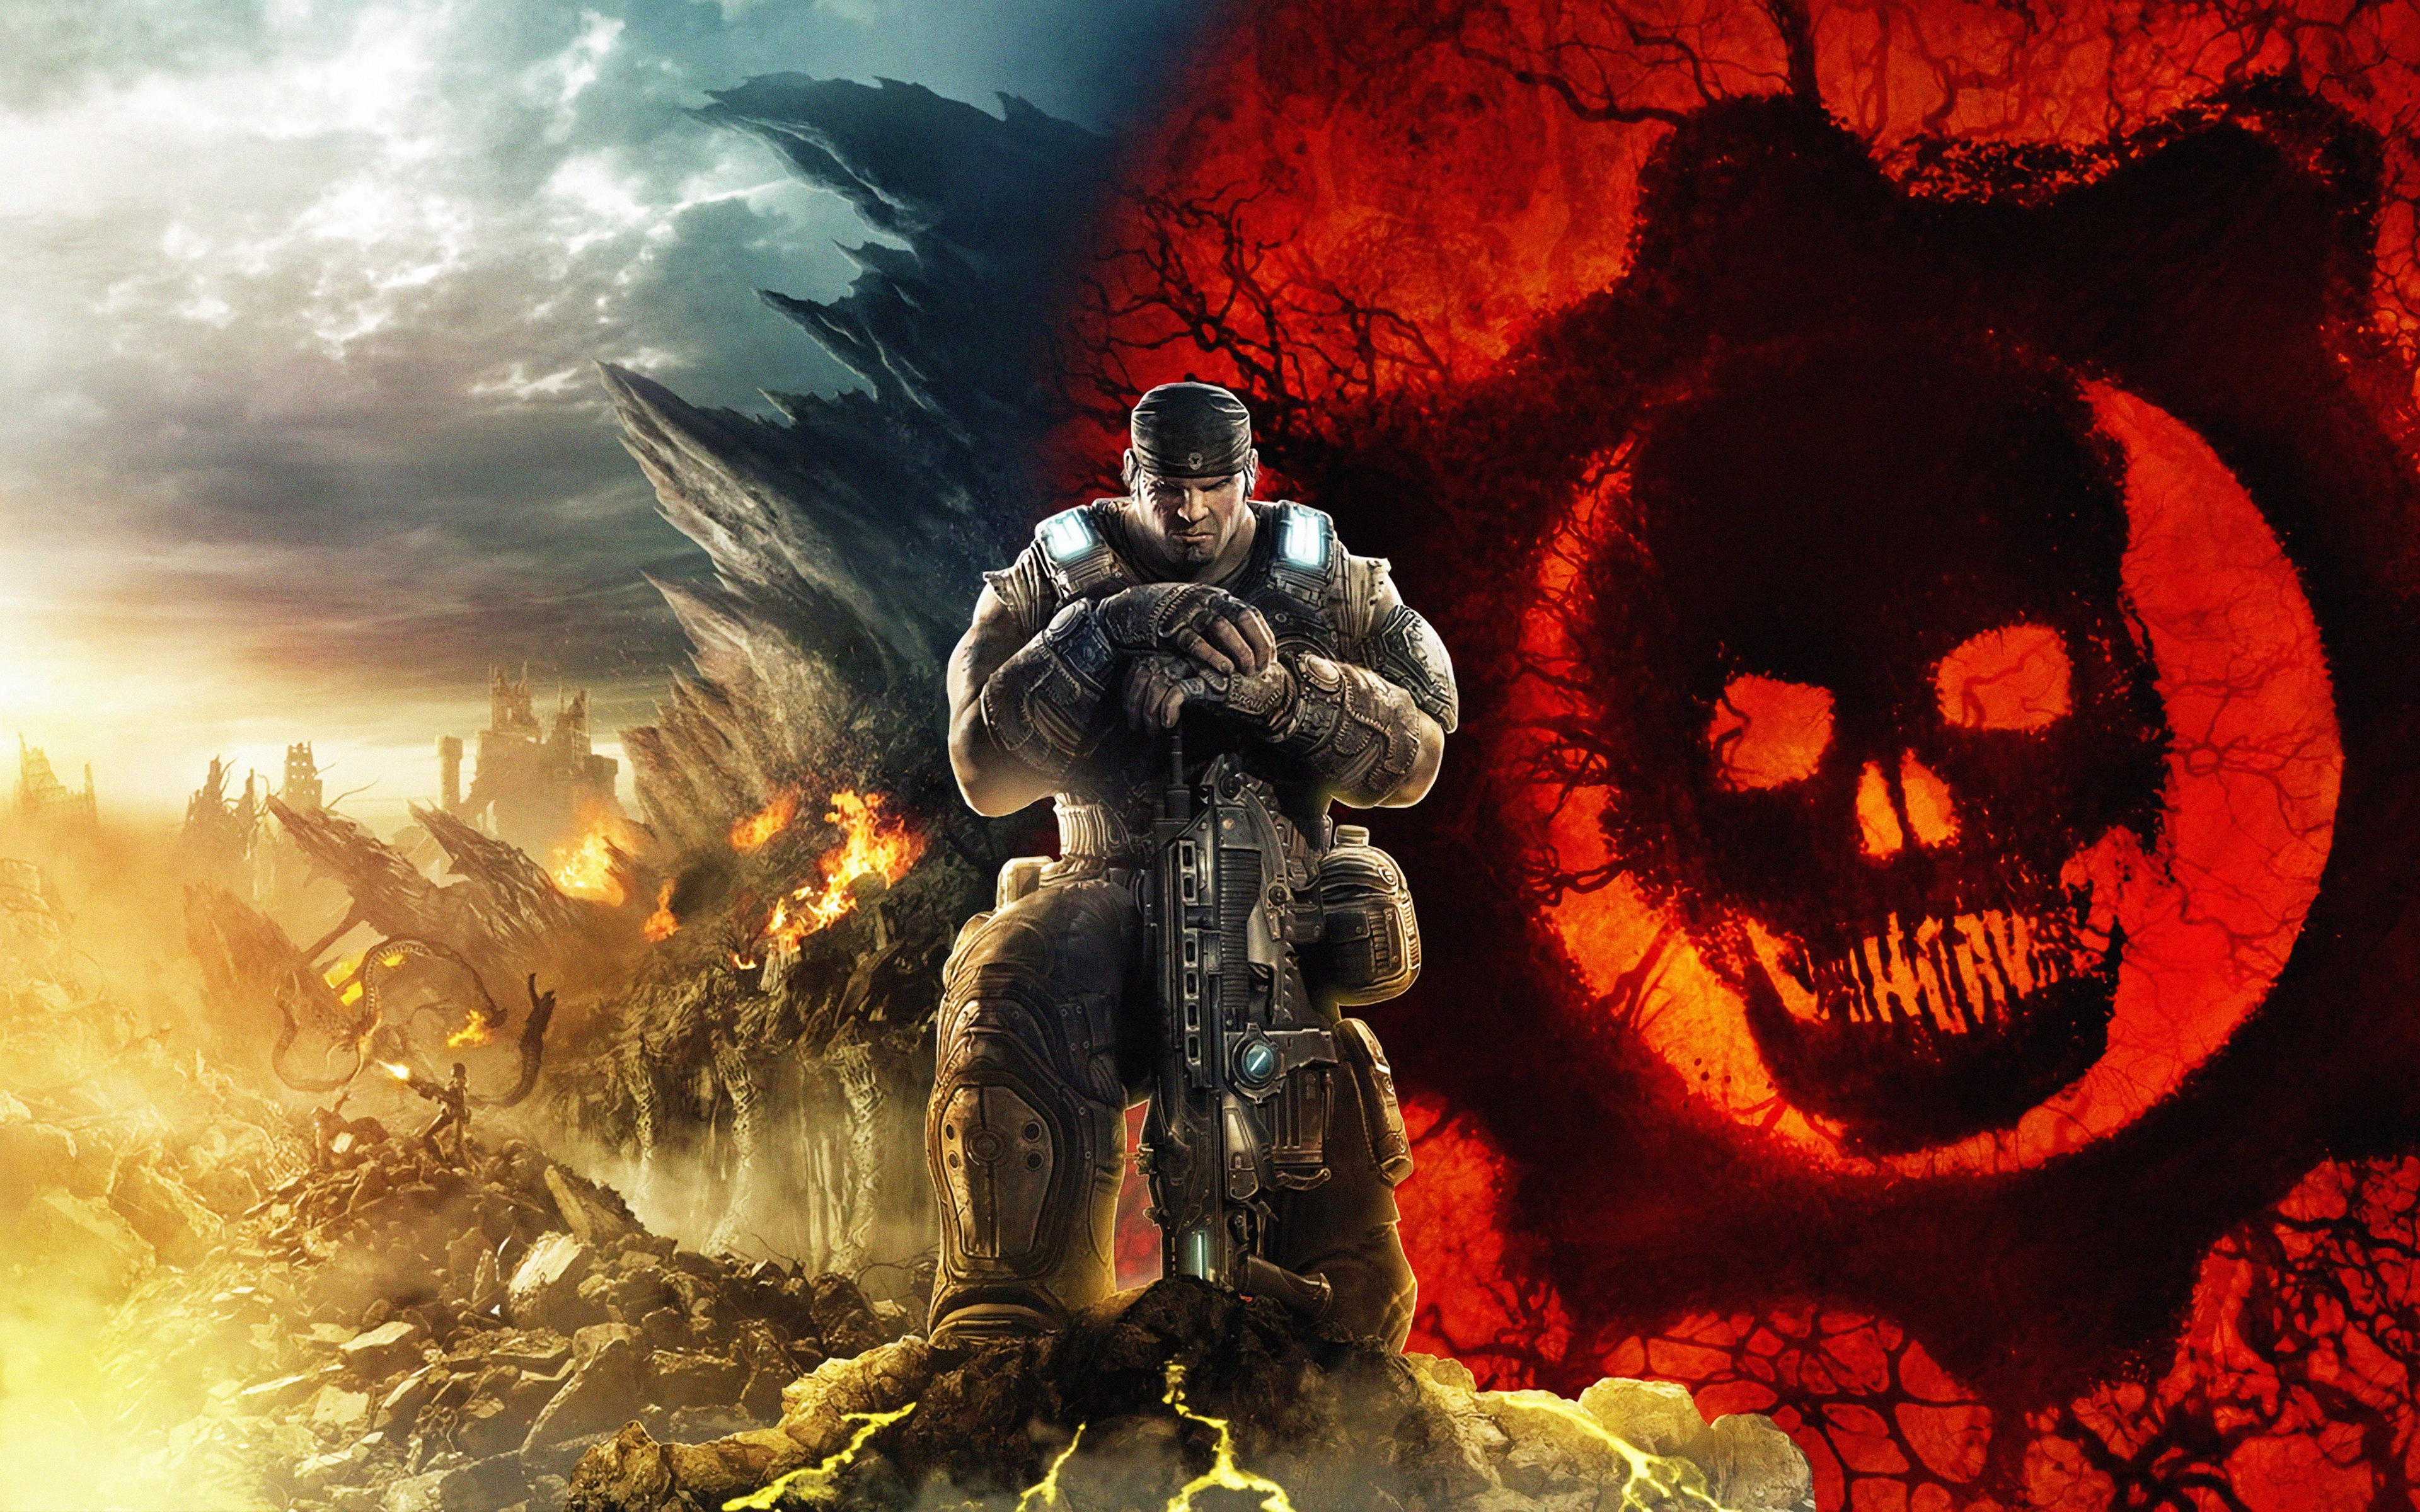 3840x2400 Gears 5 2019 4k 4k HD 4k Wallpapers, Images, Backgrounds